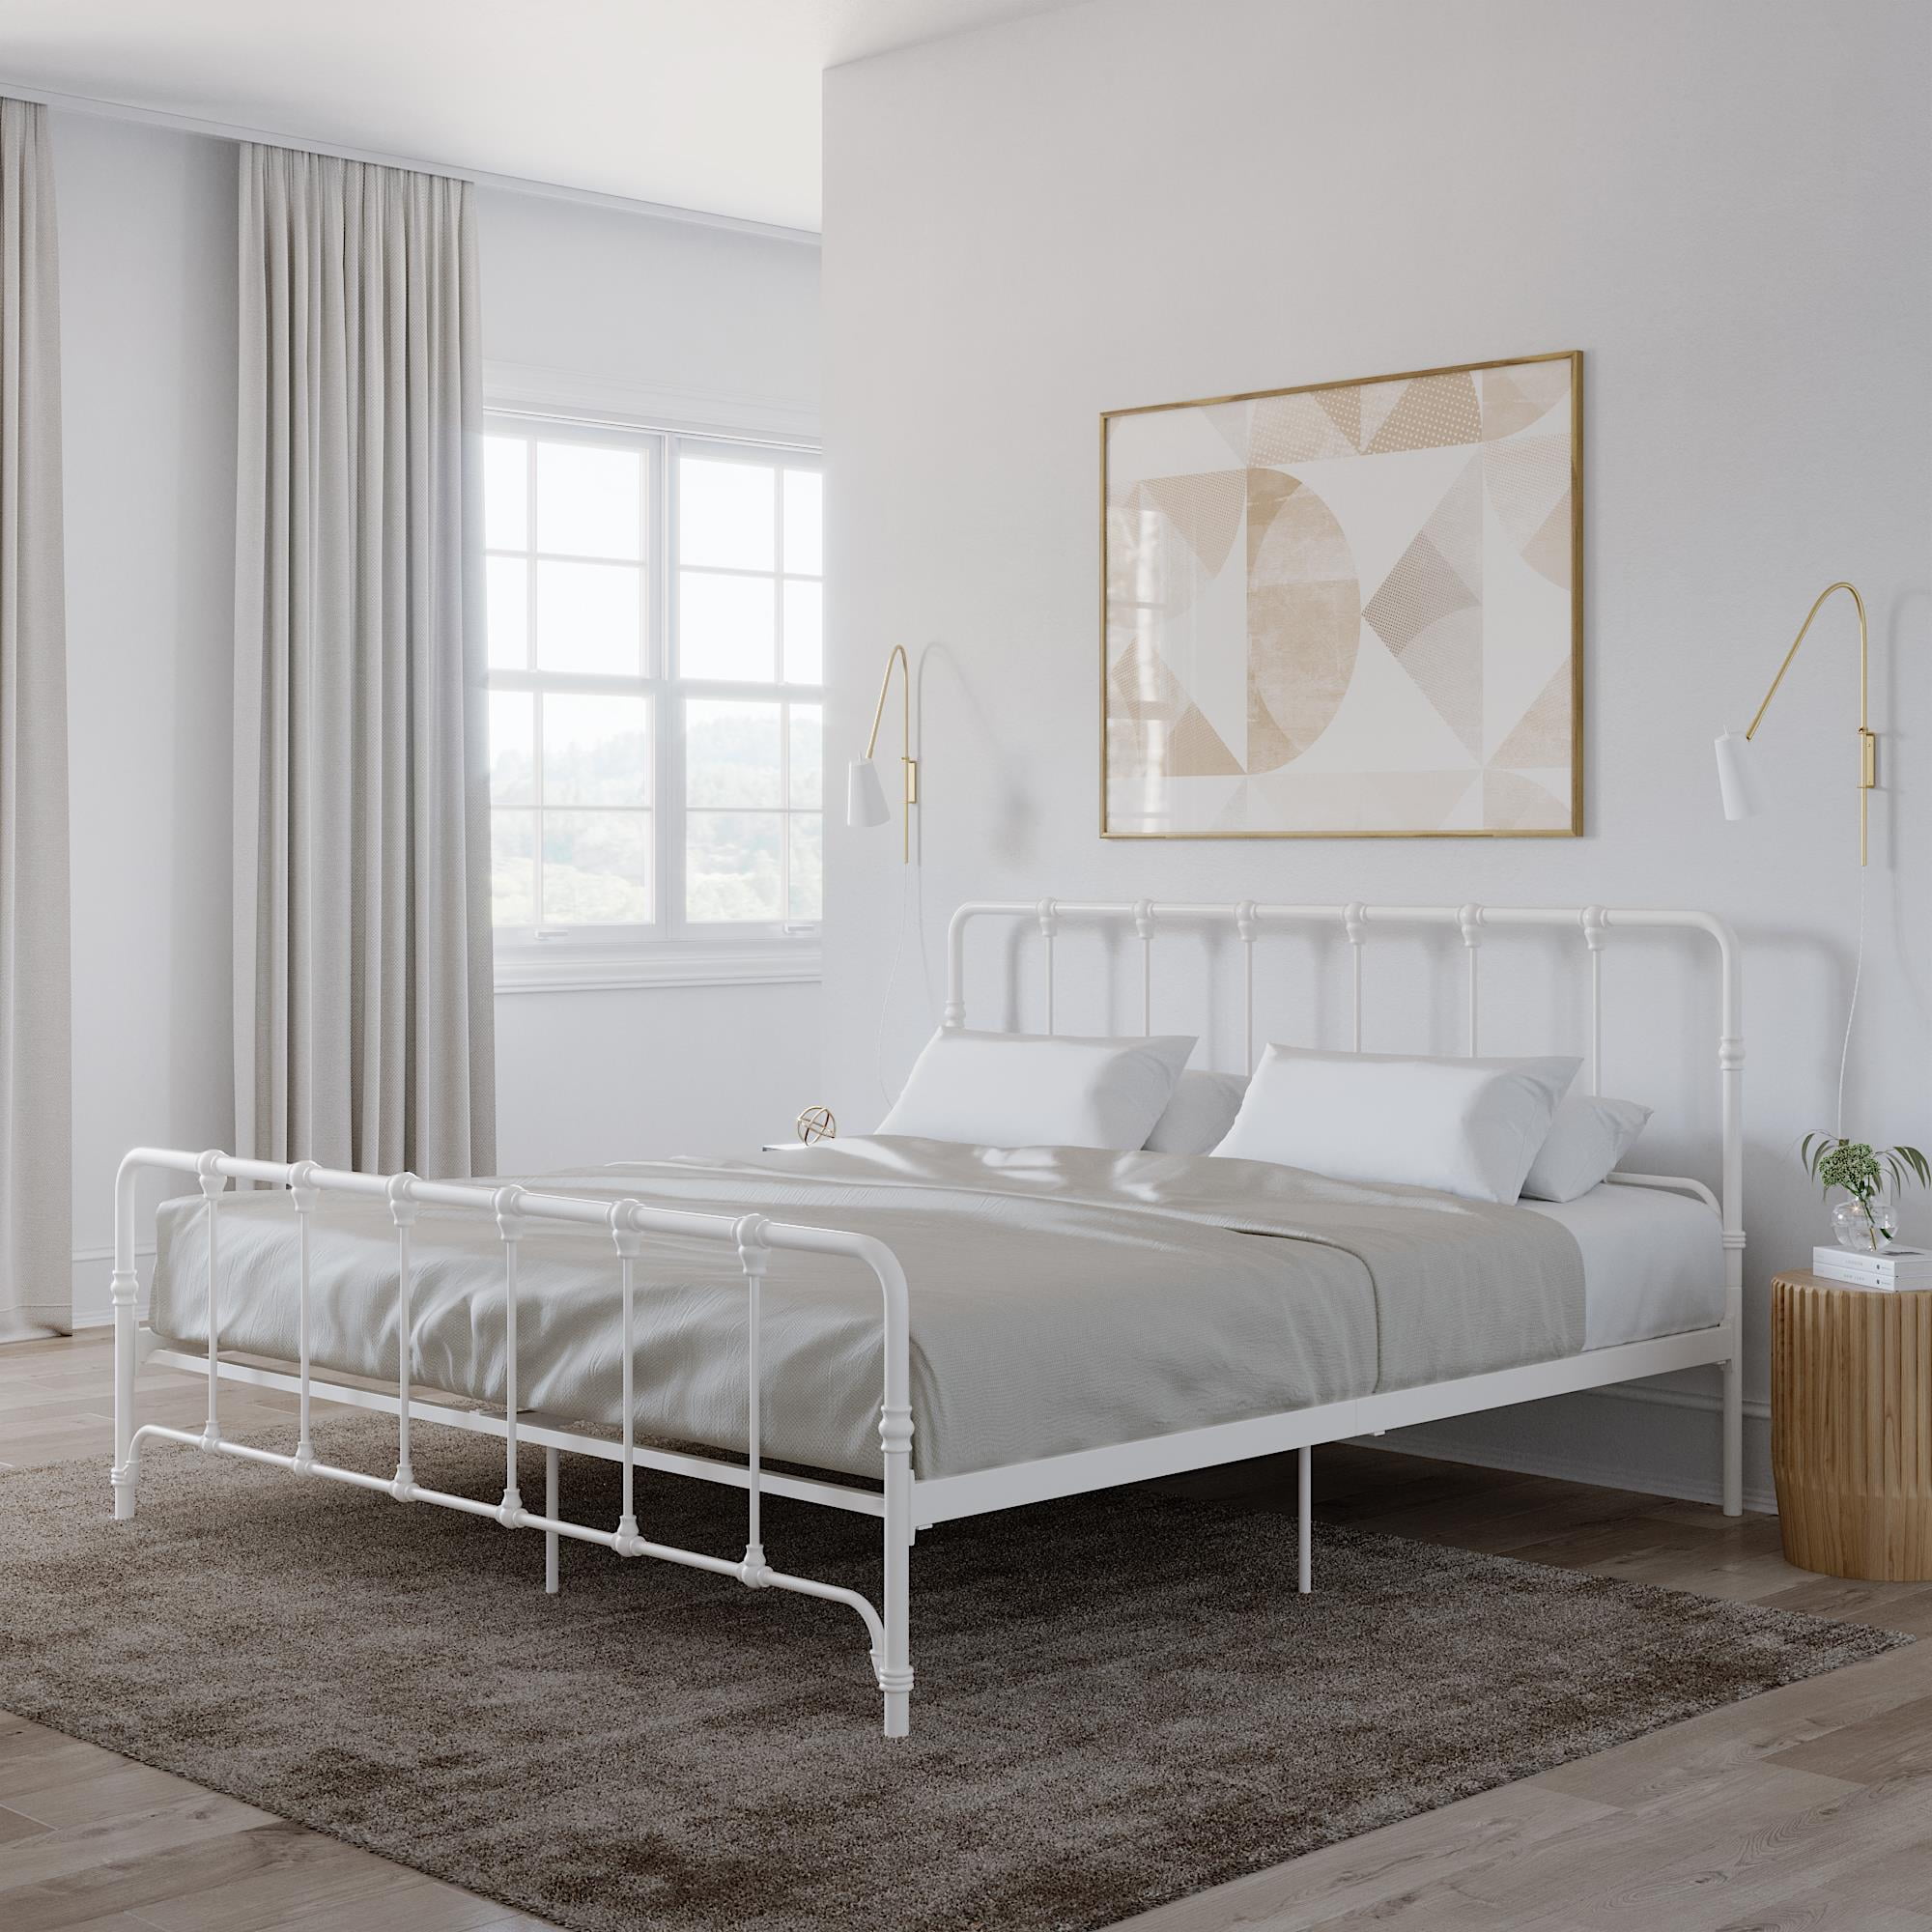 Mainstays Farmhouse Metal Bed King, White King Size Bed Frame